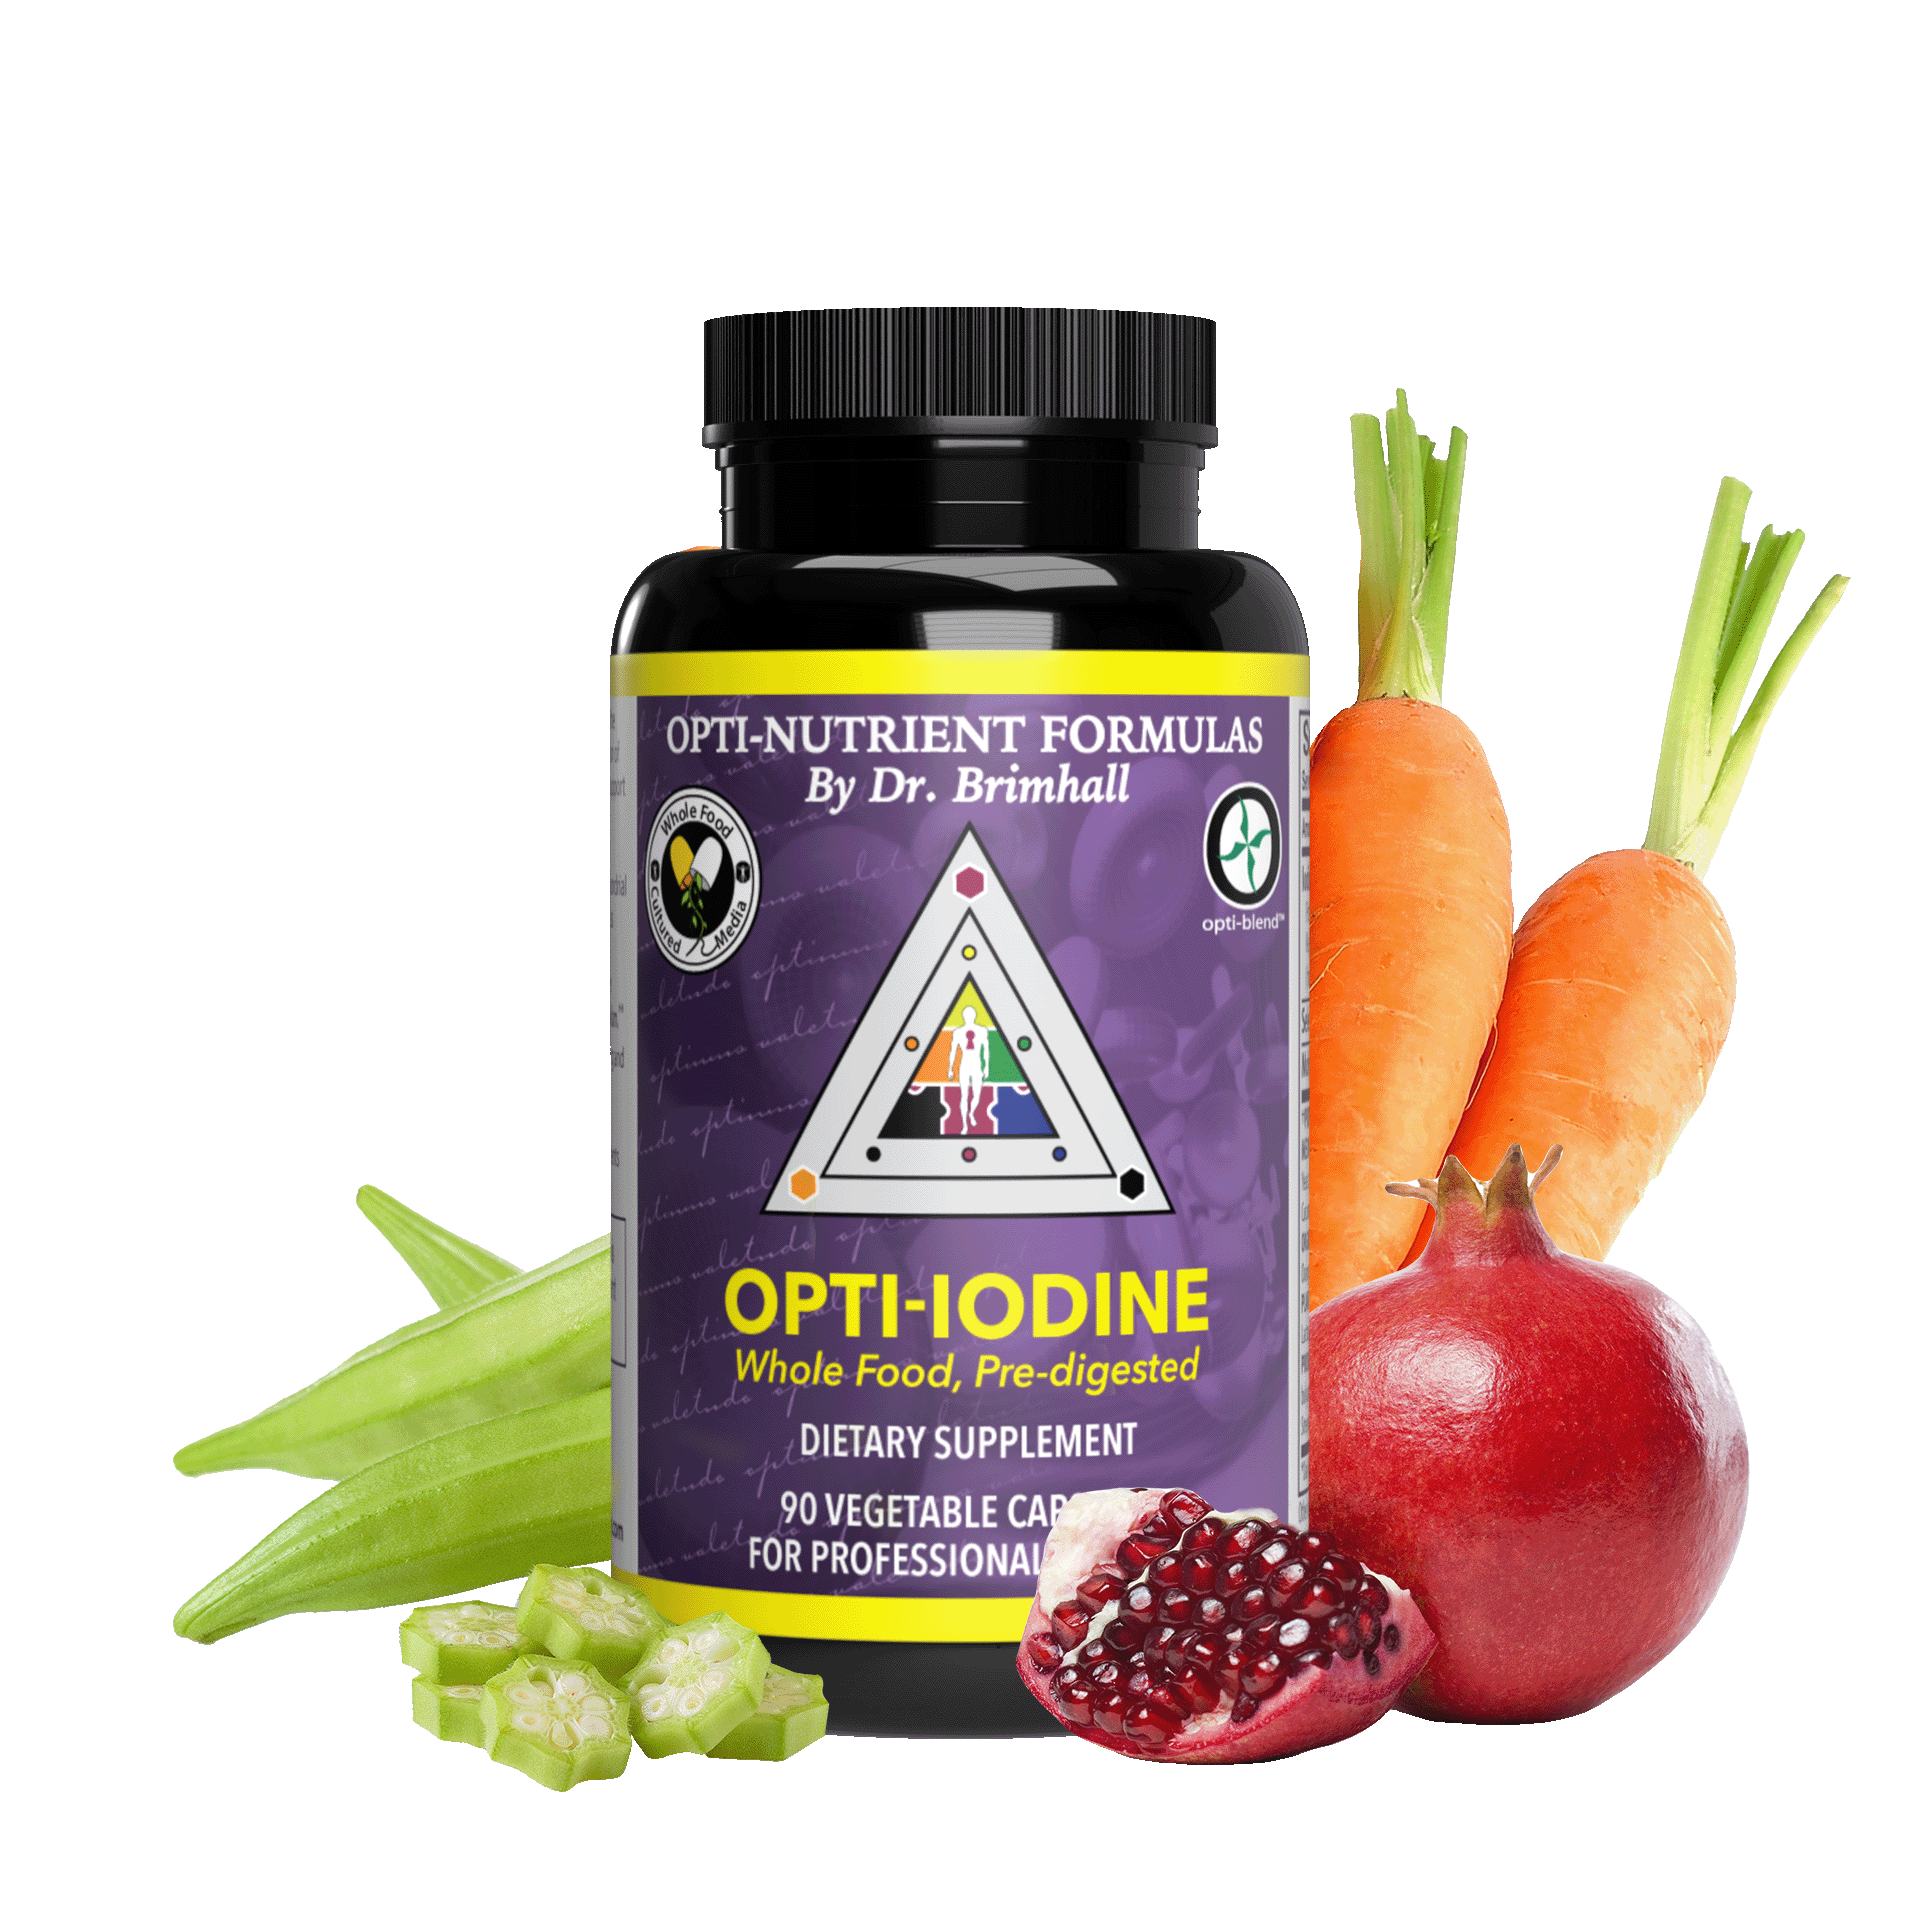 Image of a bottle of Opti-Nutrients Opti-Iodine. In the image is a pomegranate, some carrots, and okra.